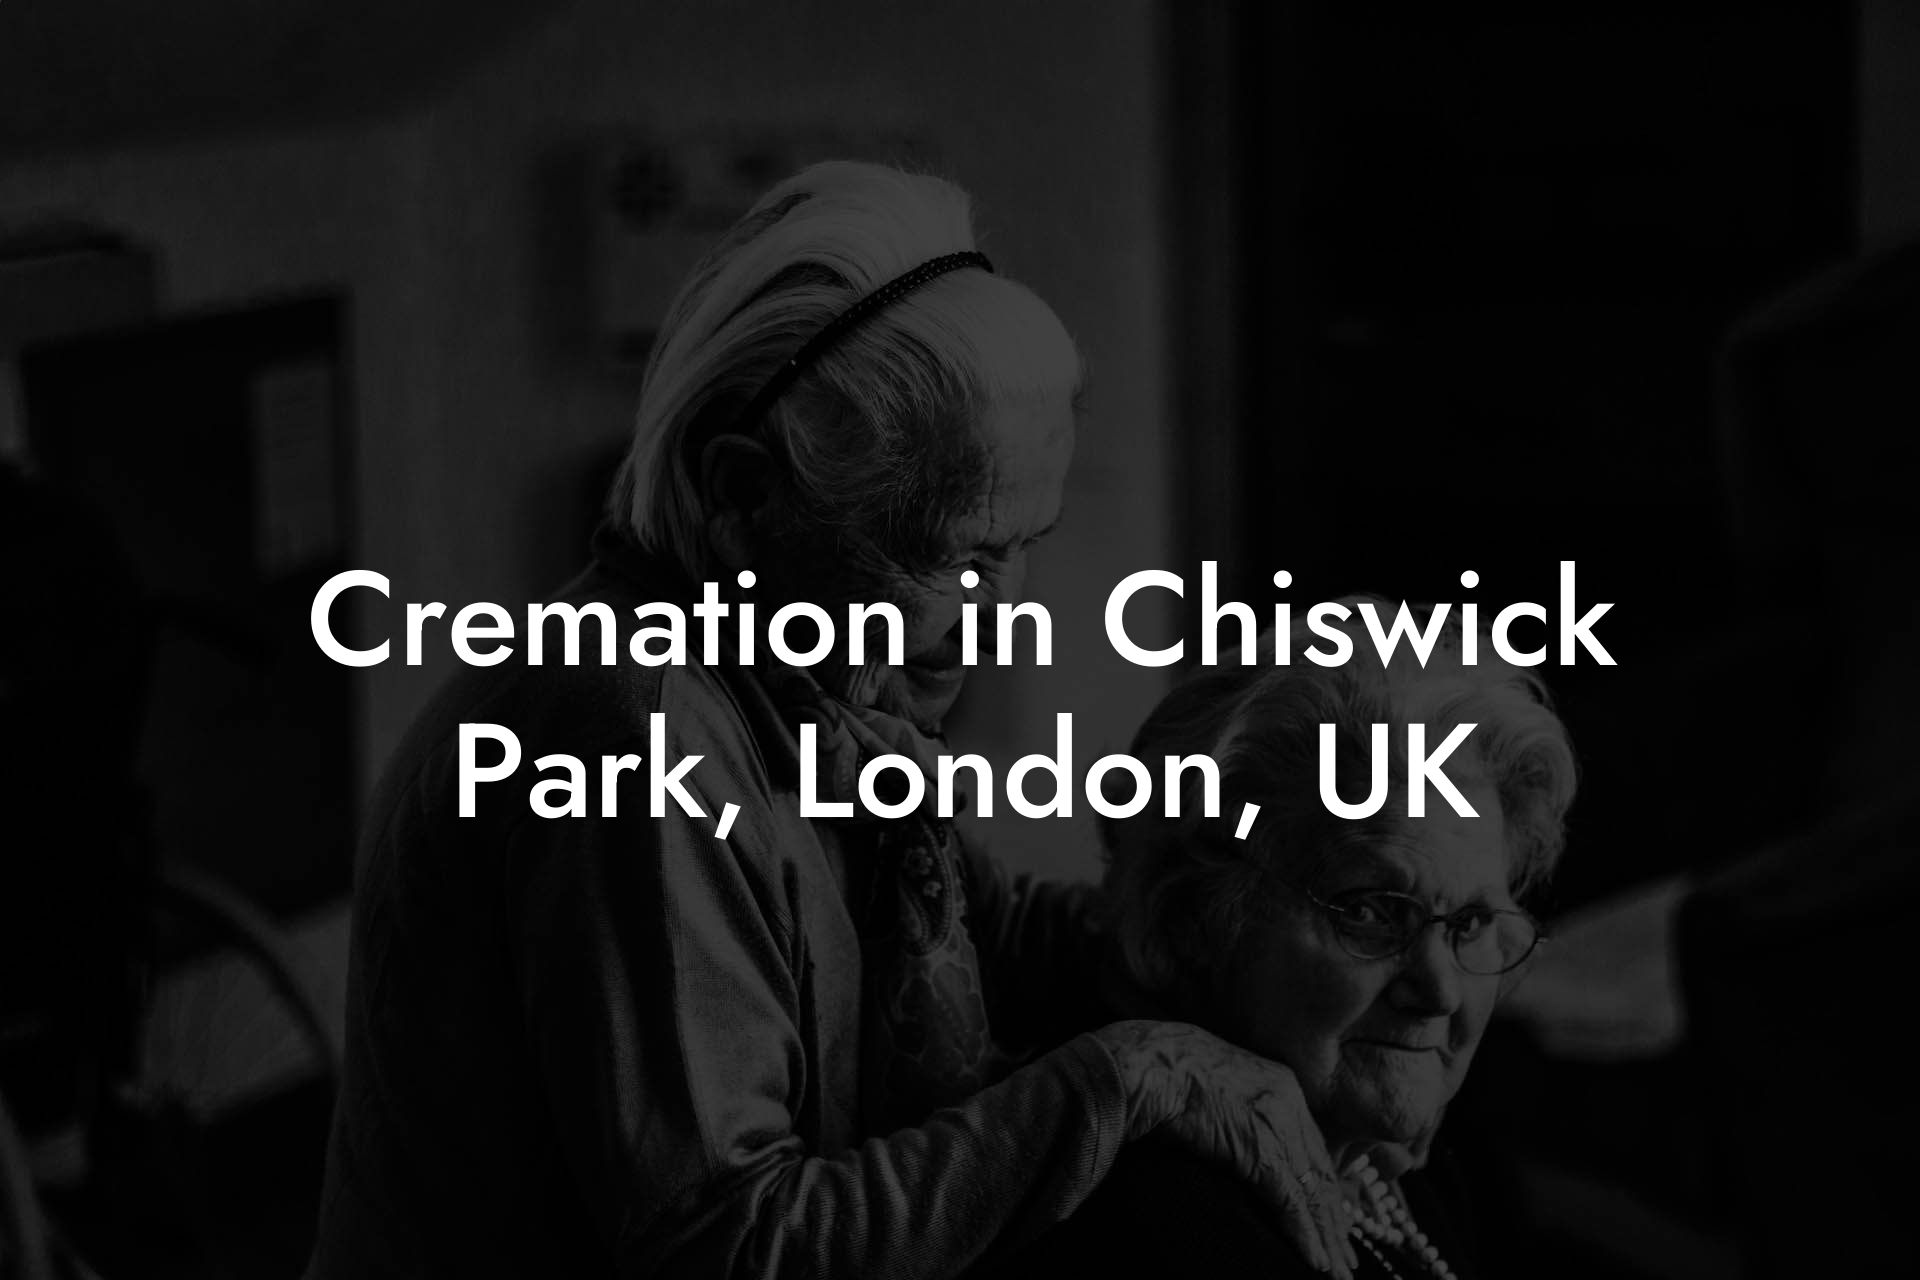 Cremation in Chiswick Park, London, UK